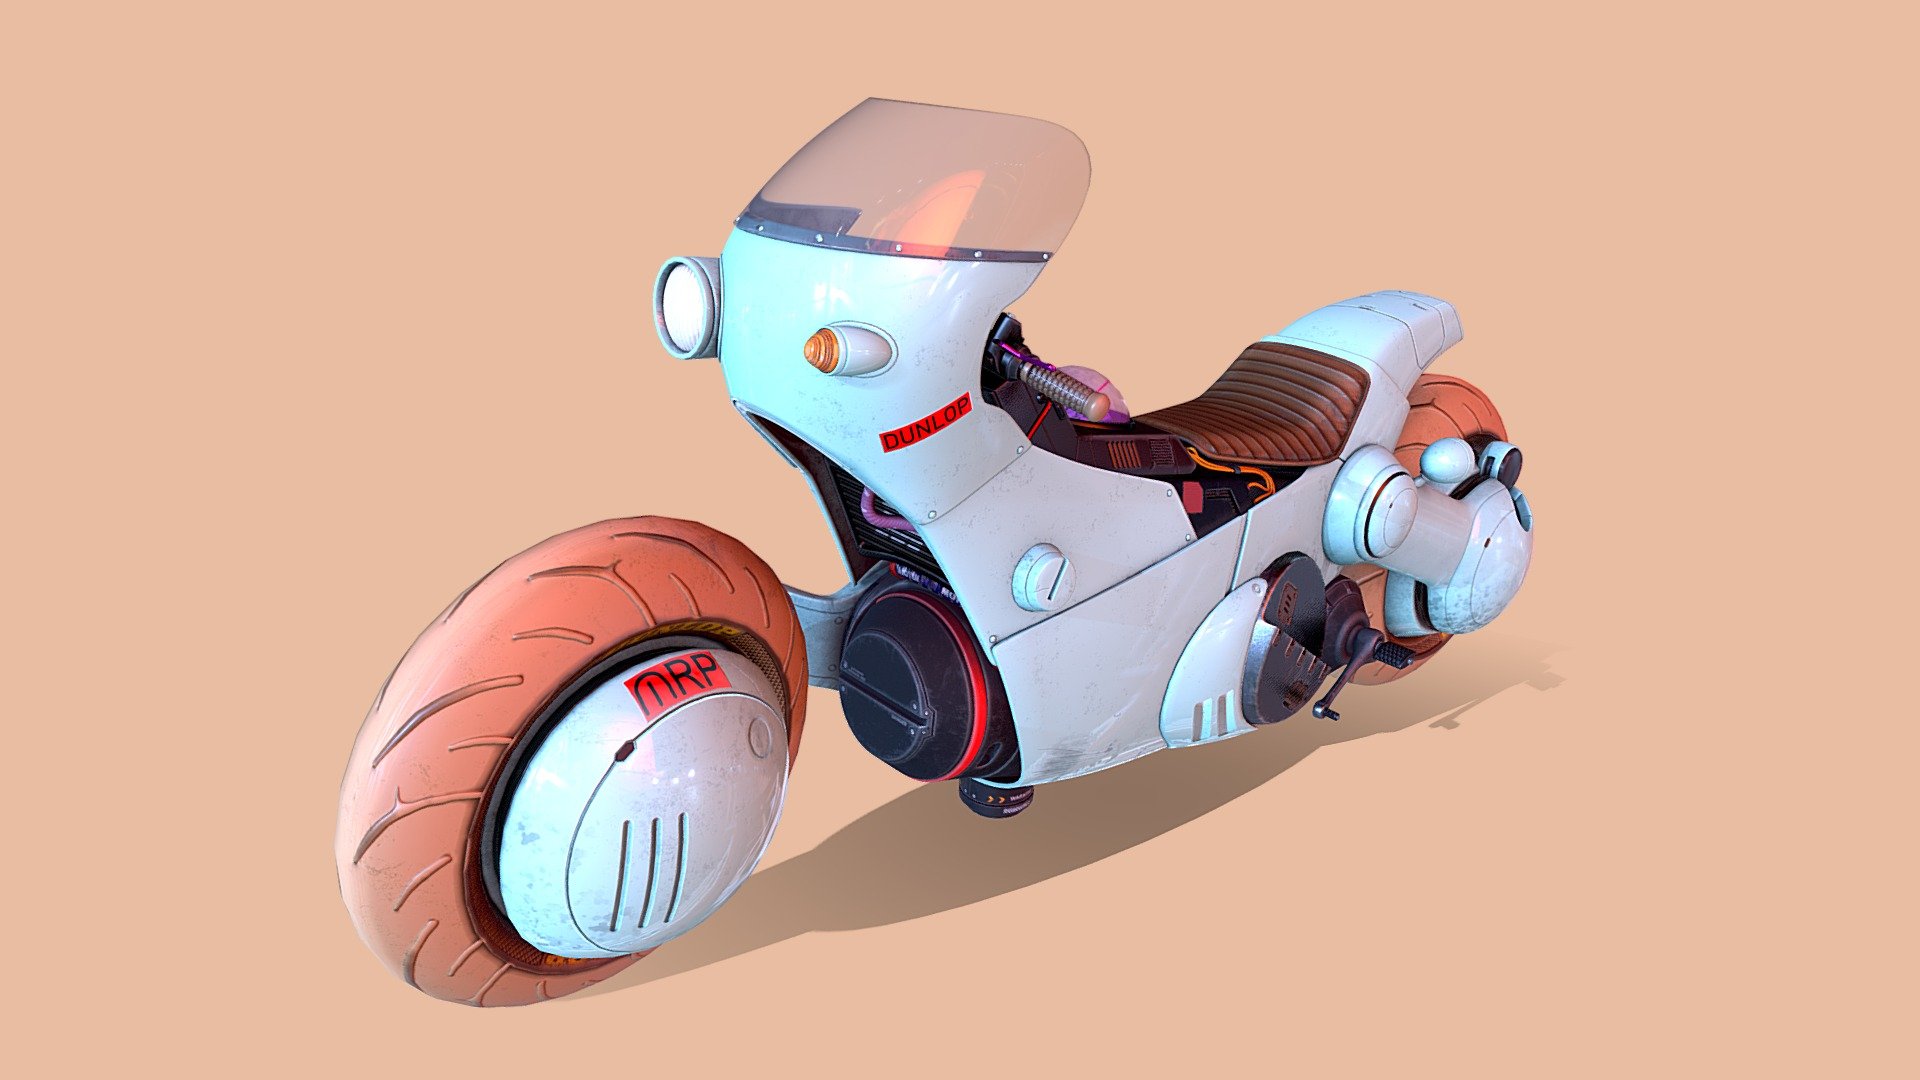 Tetsuo's Motorcycle from AKIRA. Used Blender for the model and substance painter for the textures 3d model